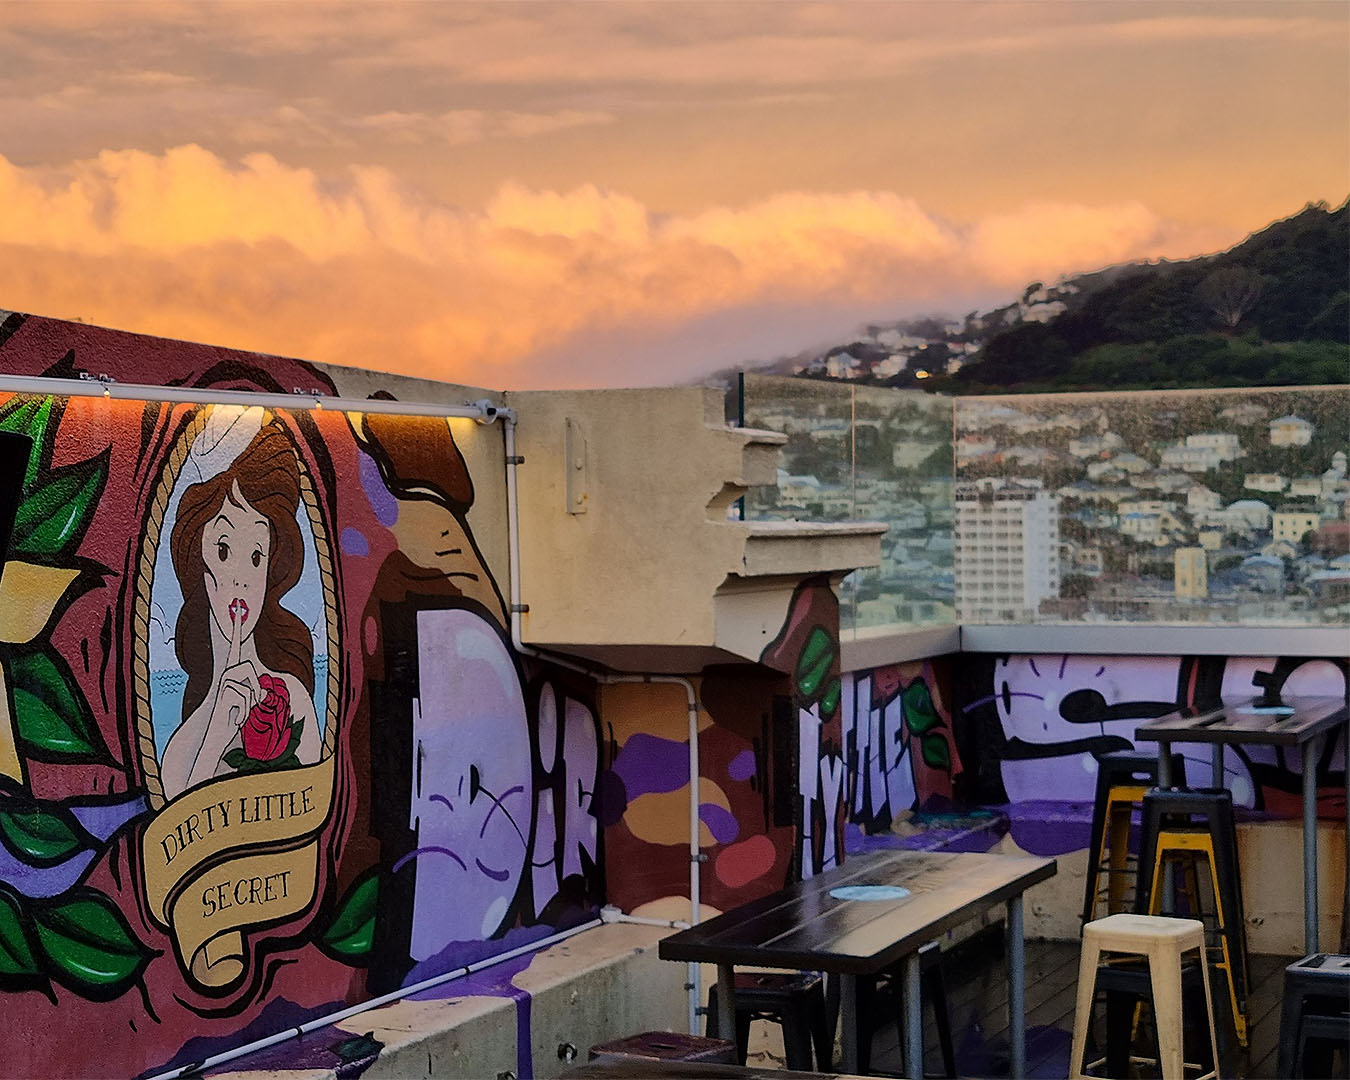 The rooftop bar at Dirty Little Secret, one of the best bars in Wellington.